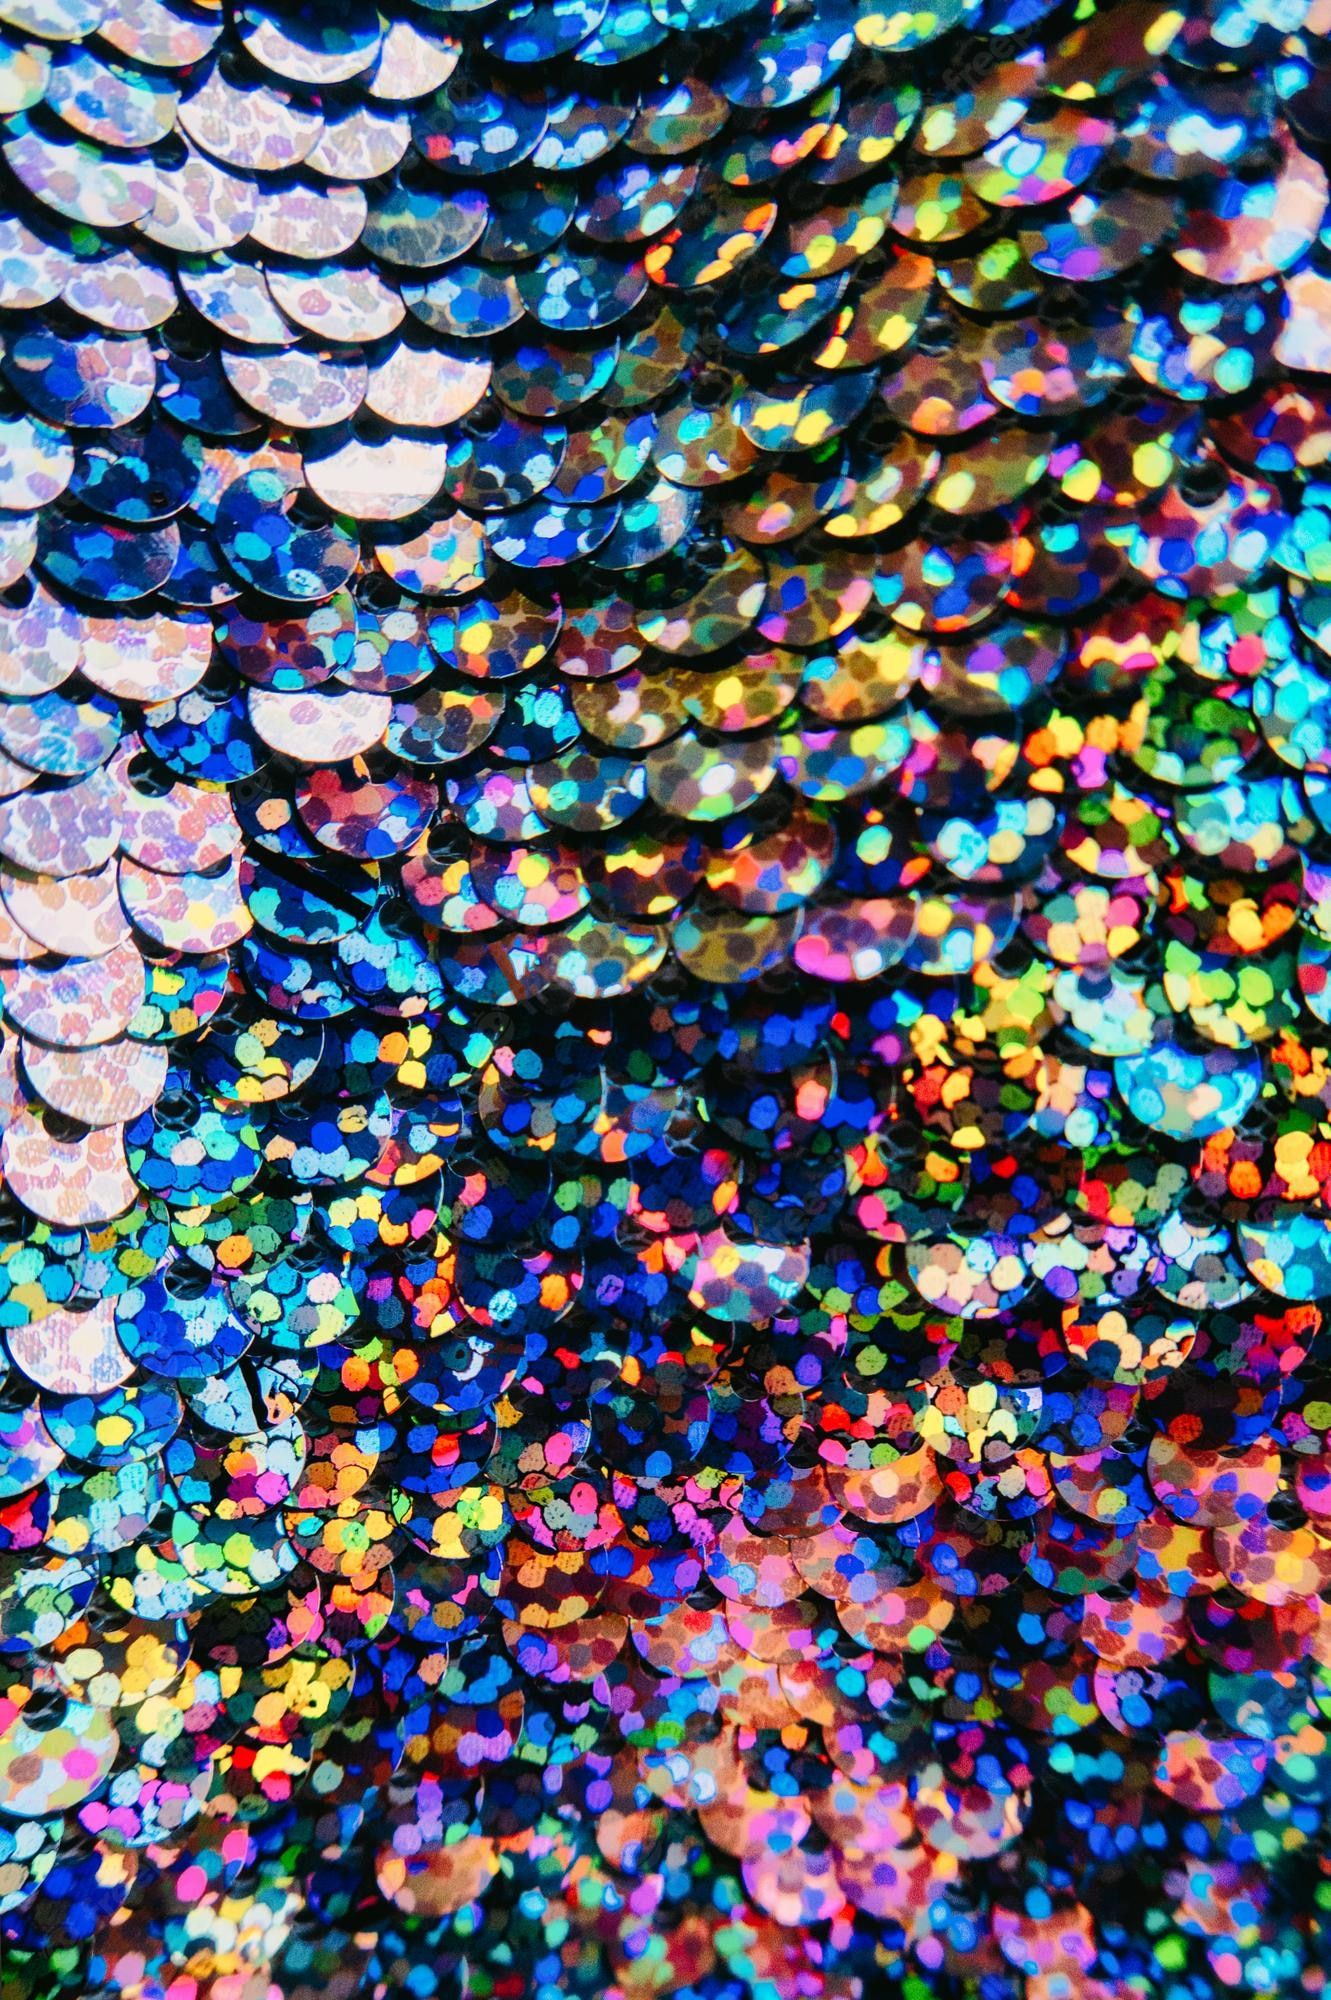 Premium Photo. Background aesthetic texture with sequin glitter